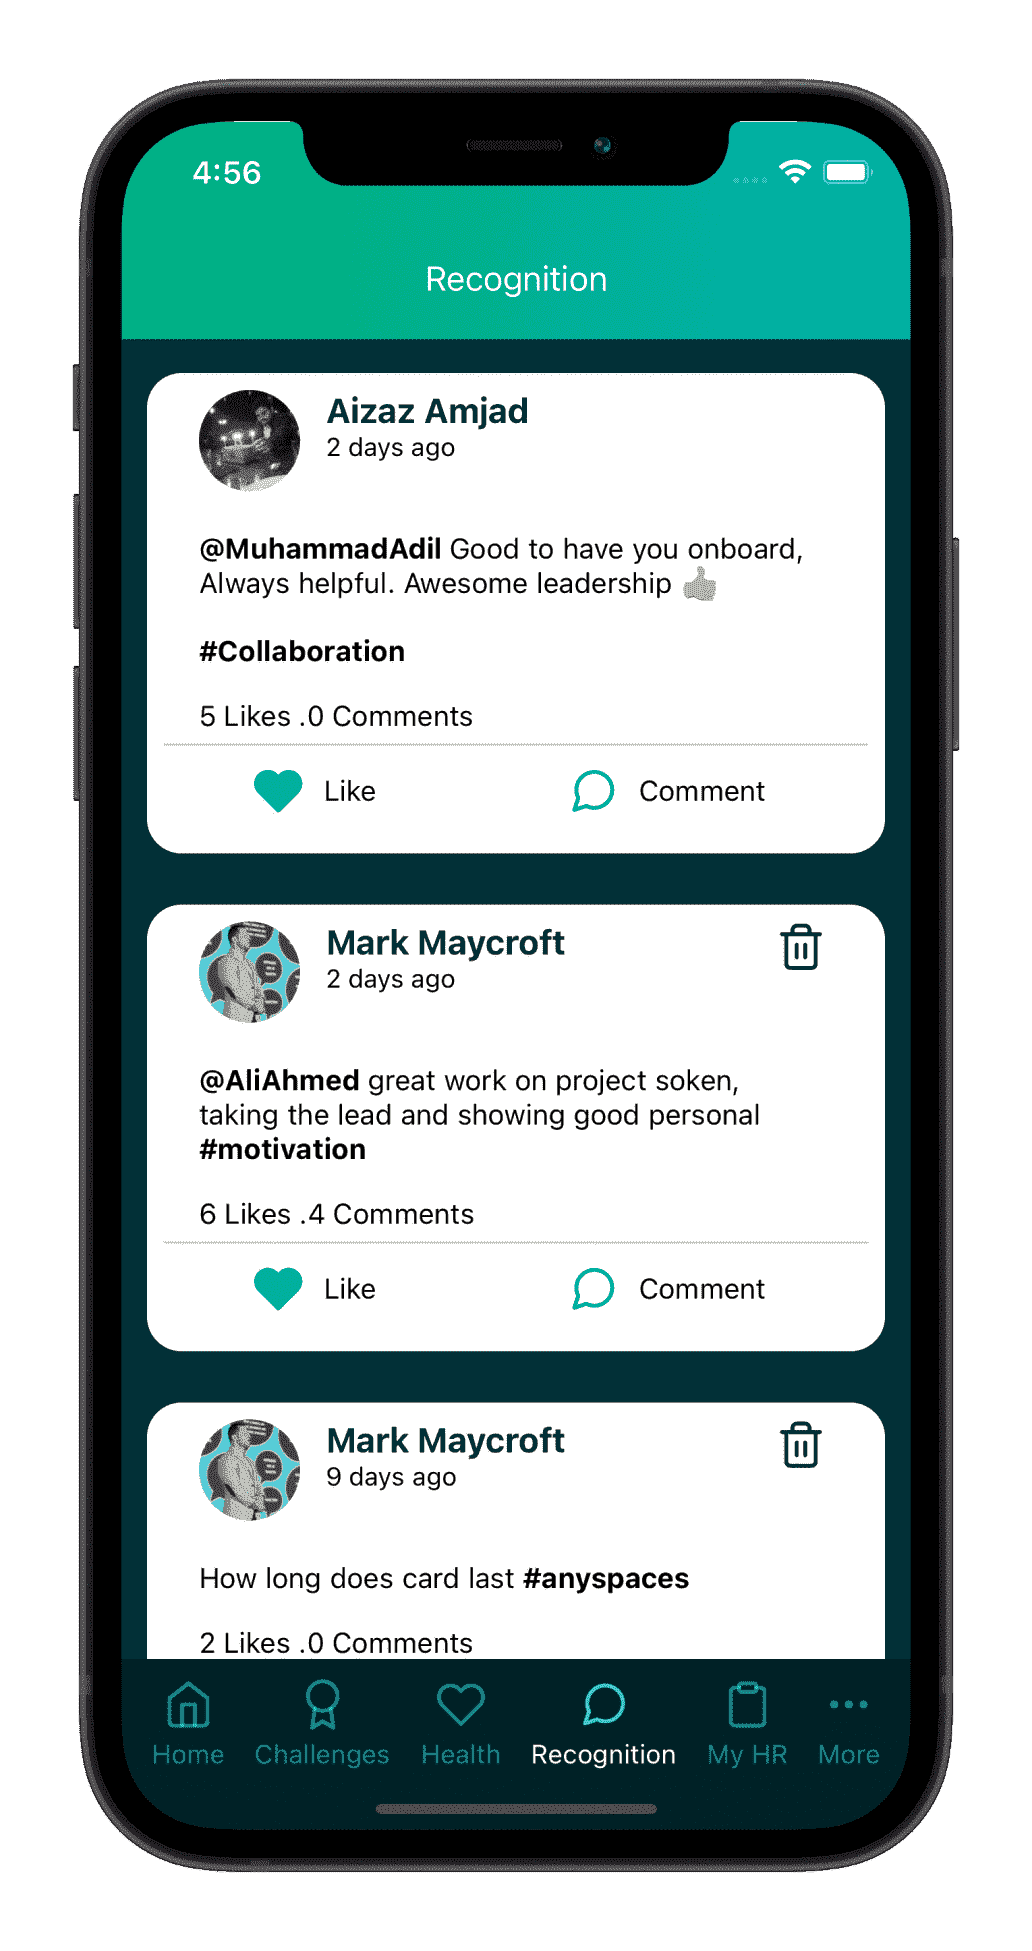 Recognition page in wellness app